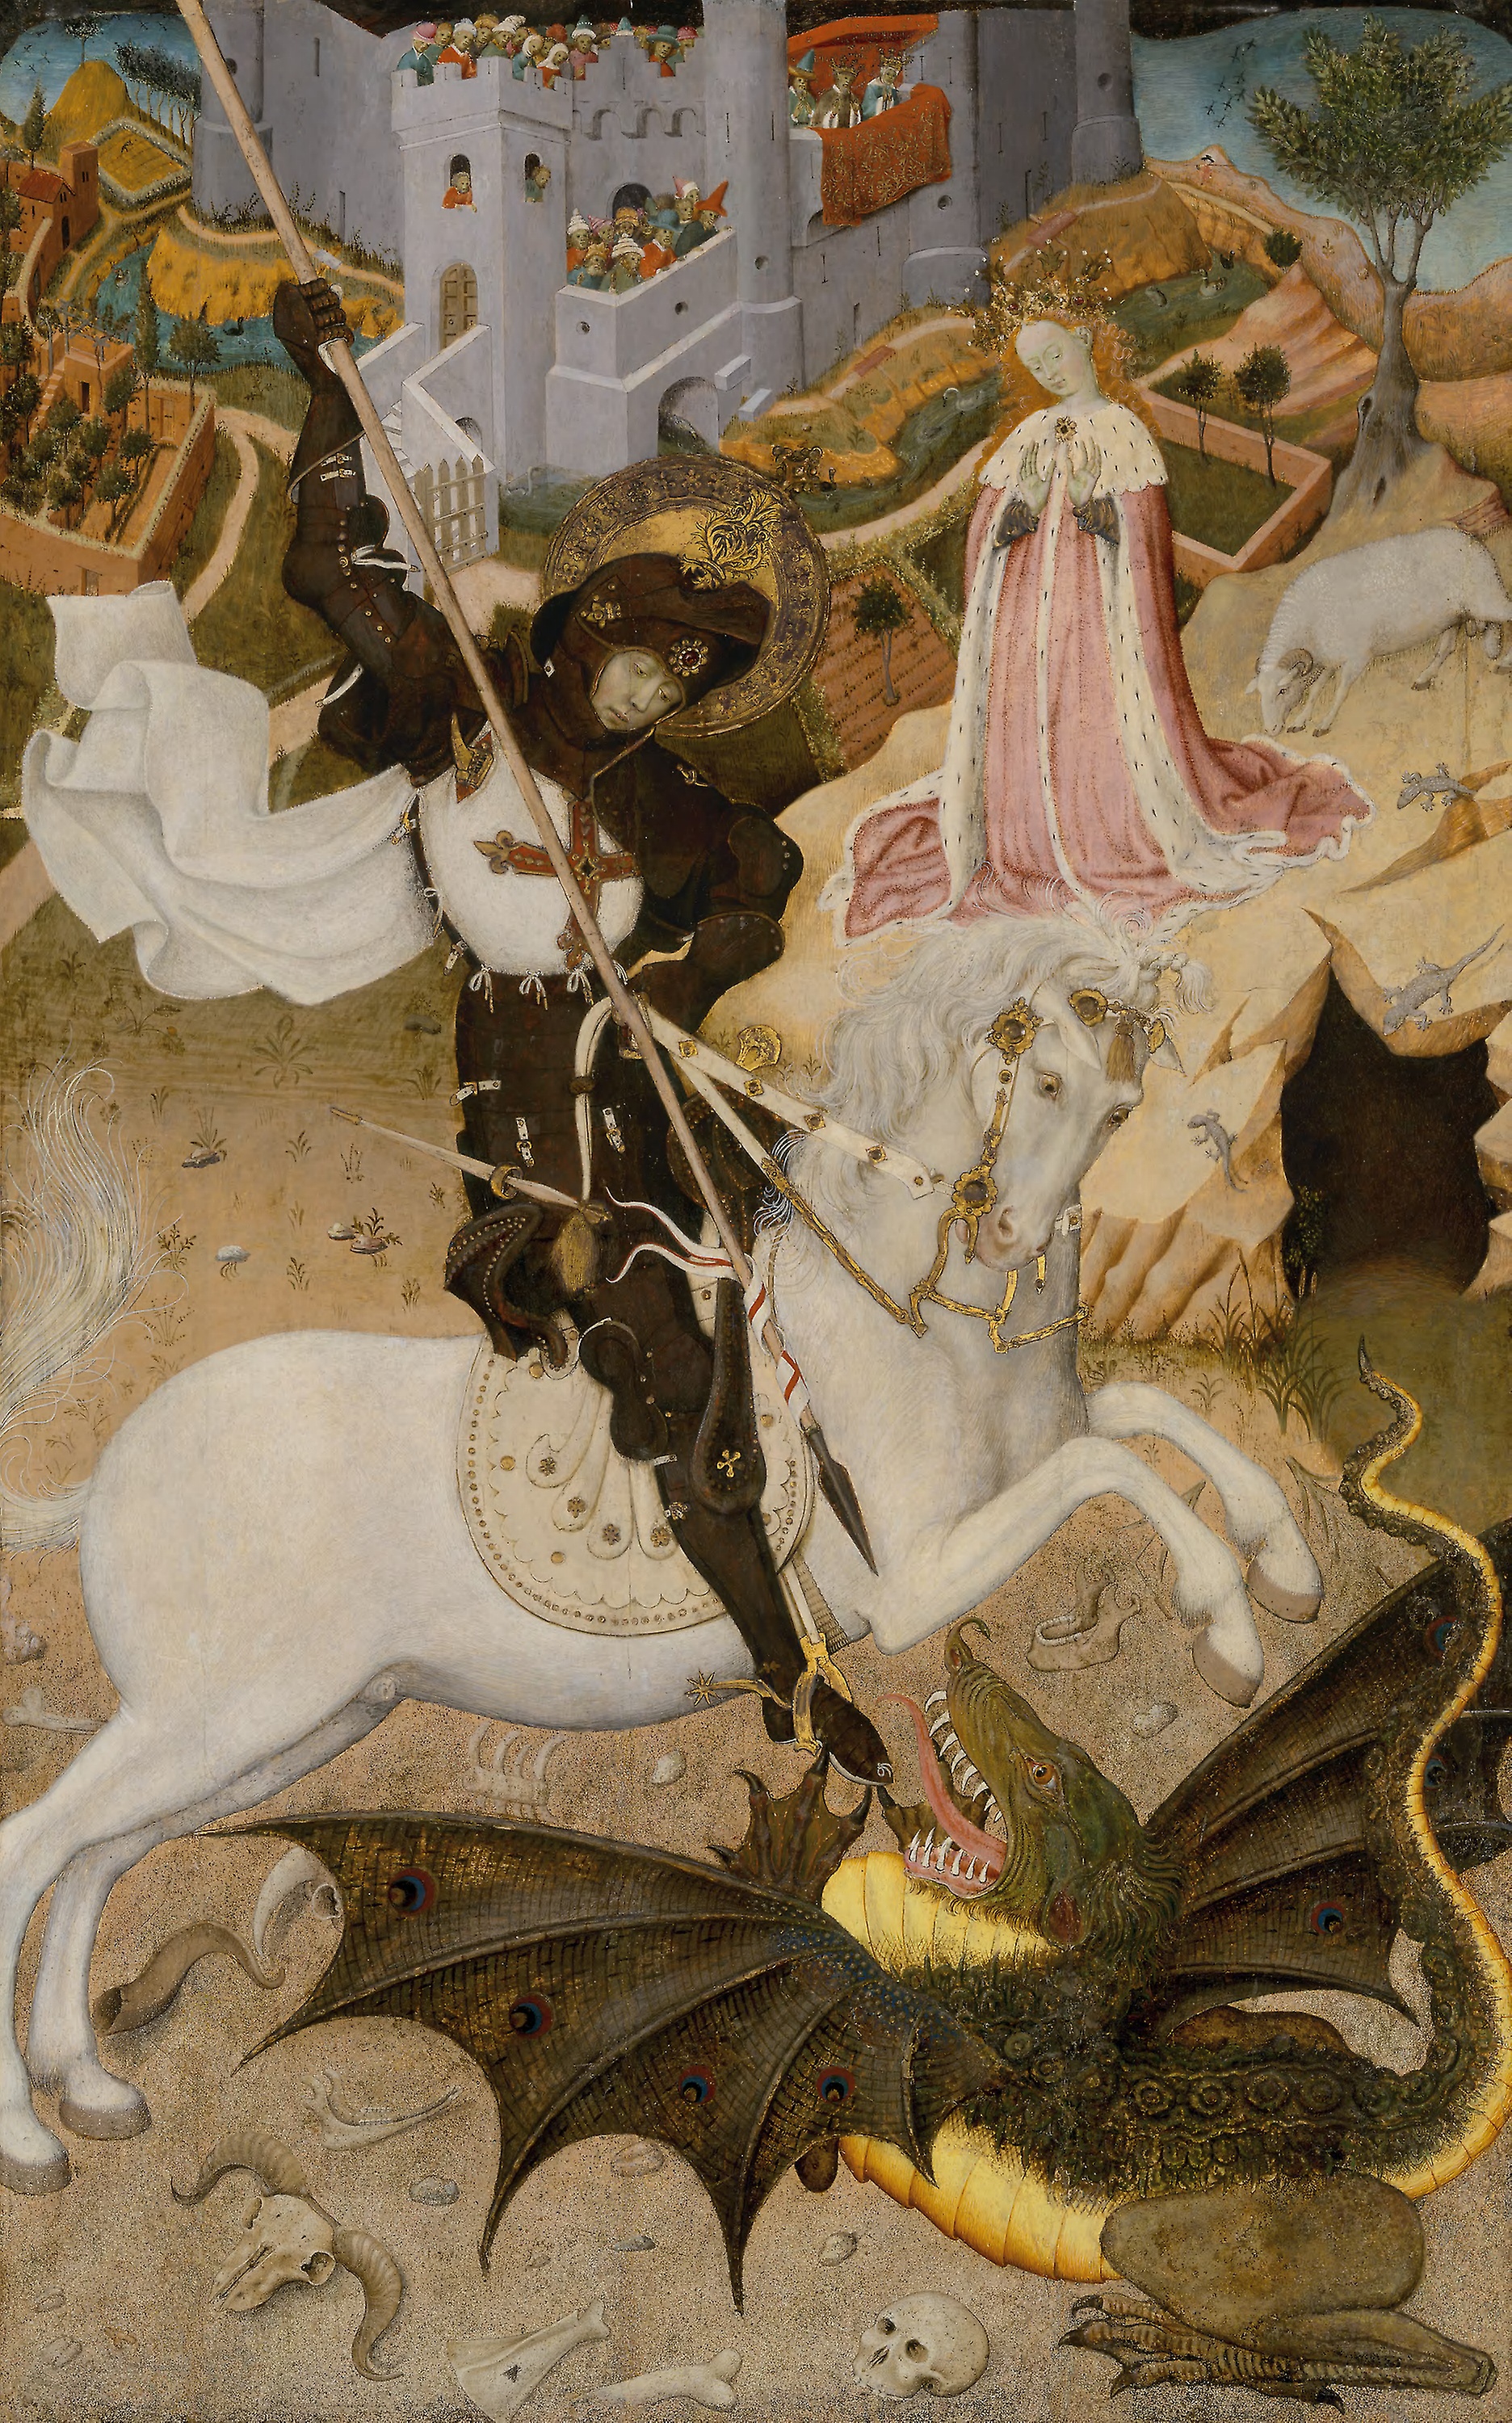 Saint George and the Dragon by Bernat Martorell - 1434/35 - 155.6 × 98.1 cm Art Institute of Chicago